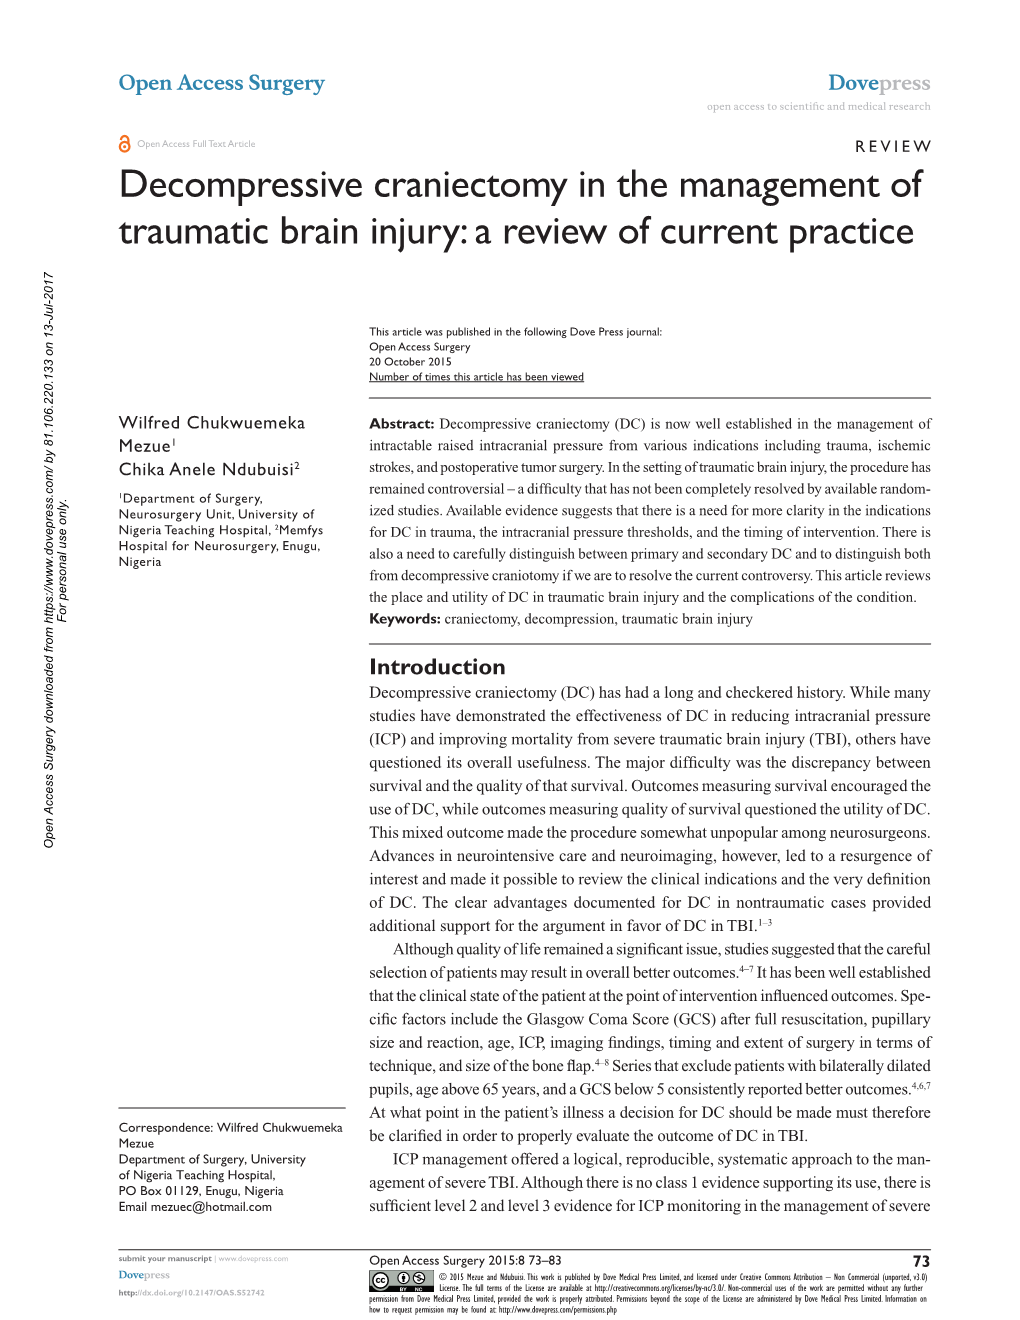 Decompressive Craniectomy in the Management of Traumatic Brain Injury: a Review of Current Practice